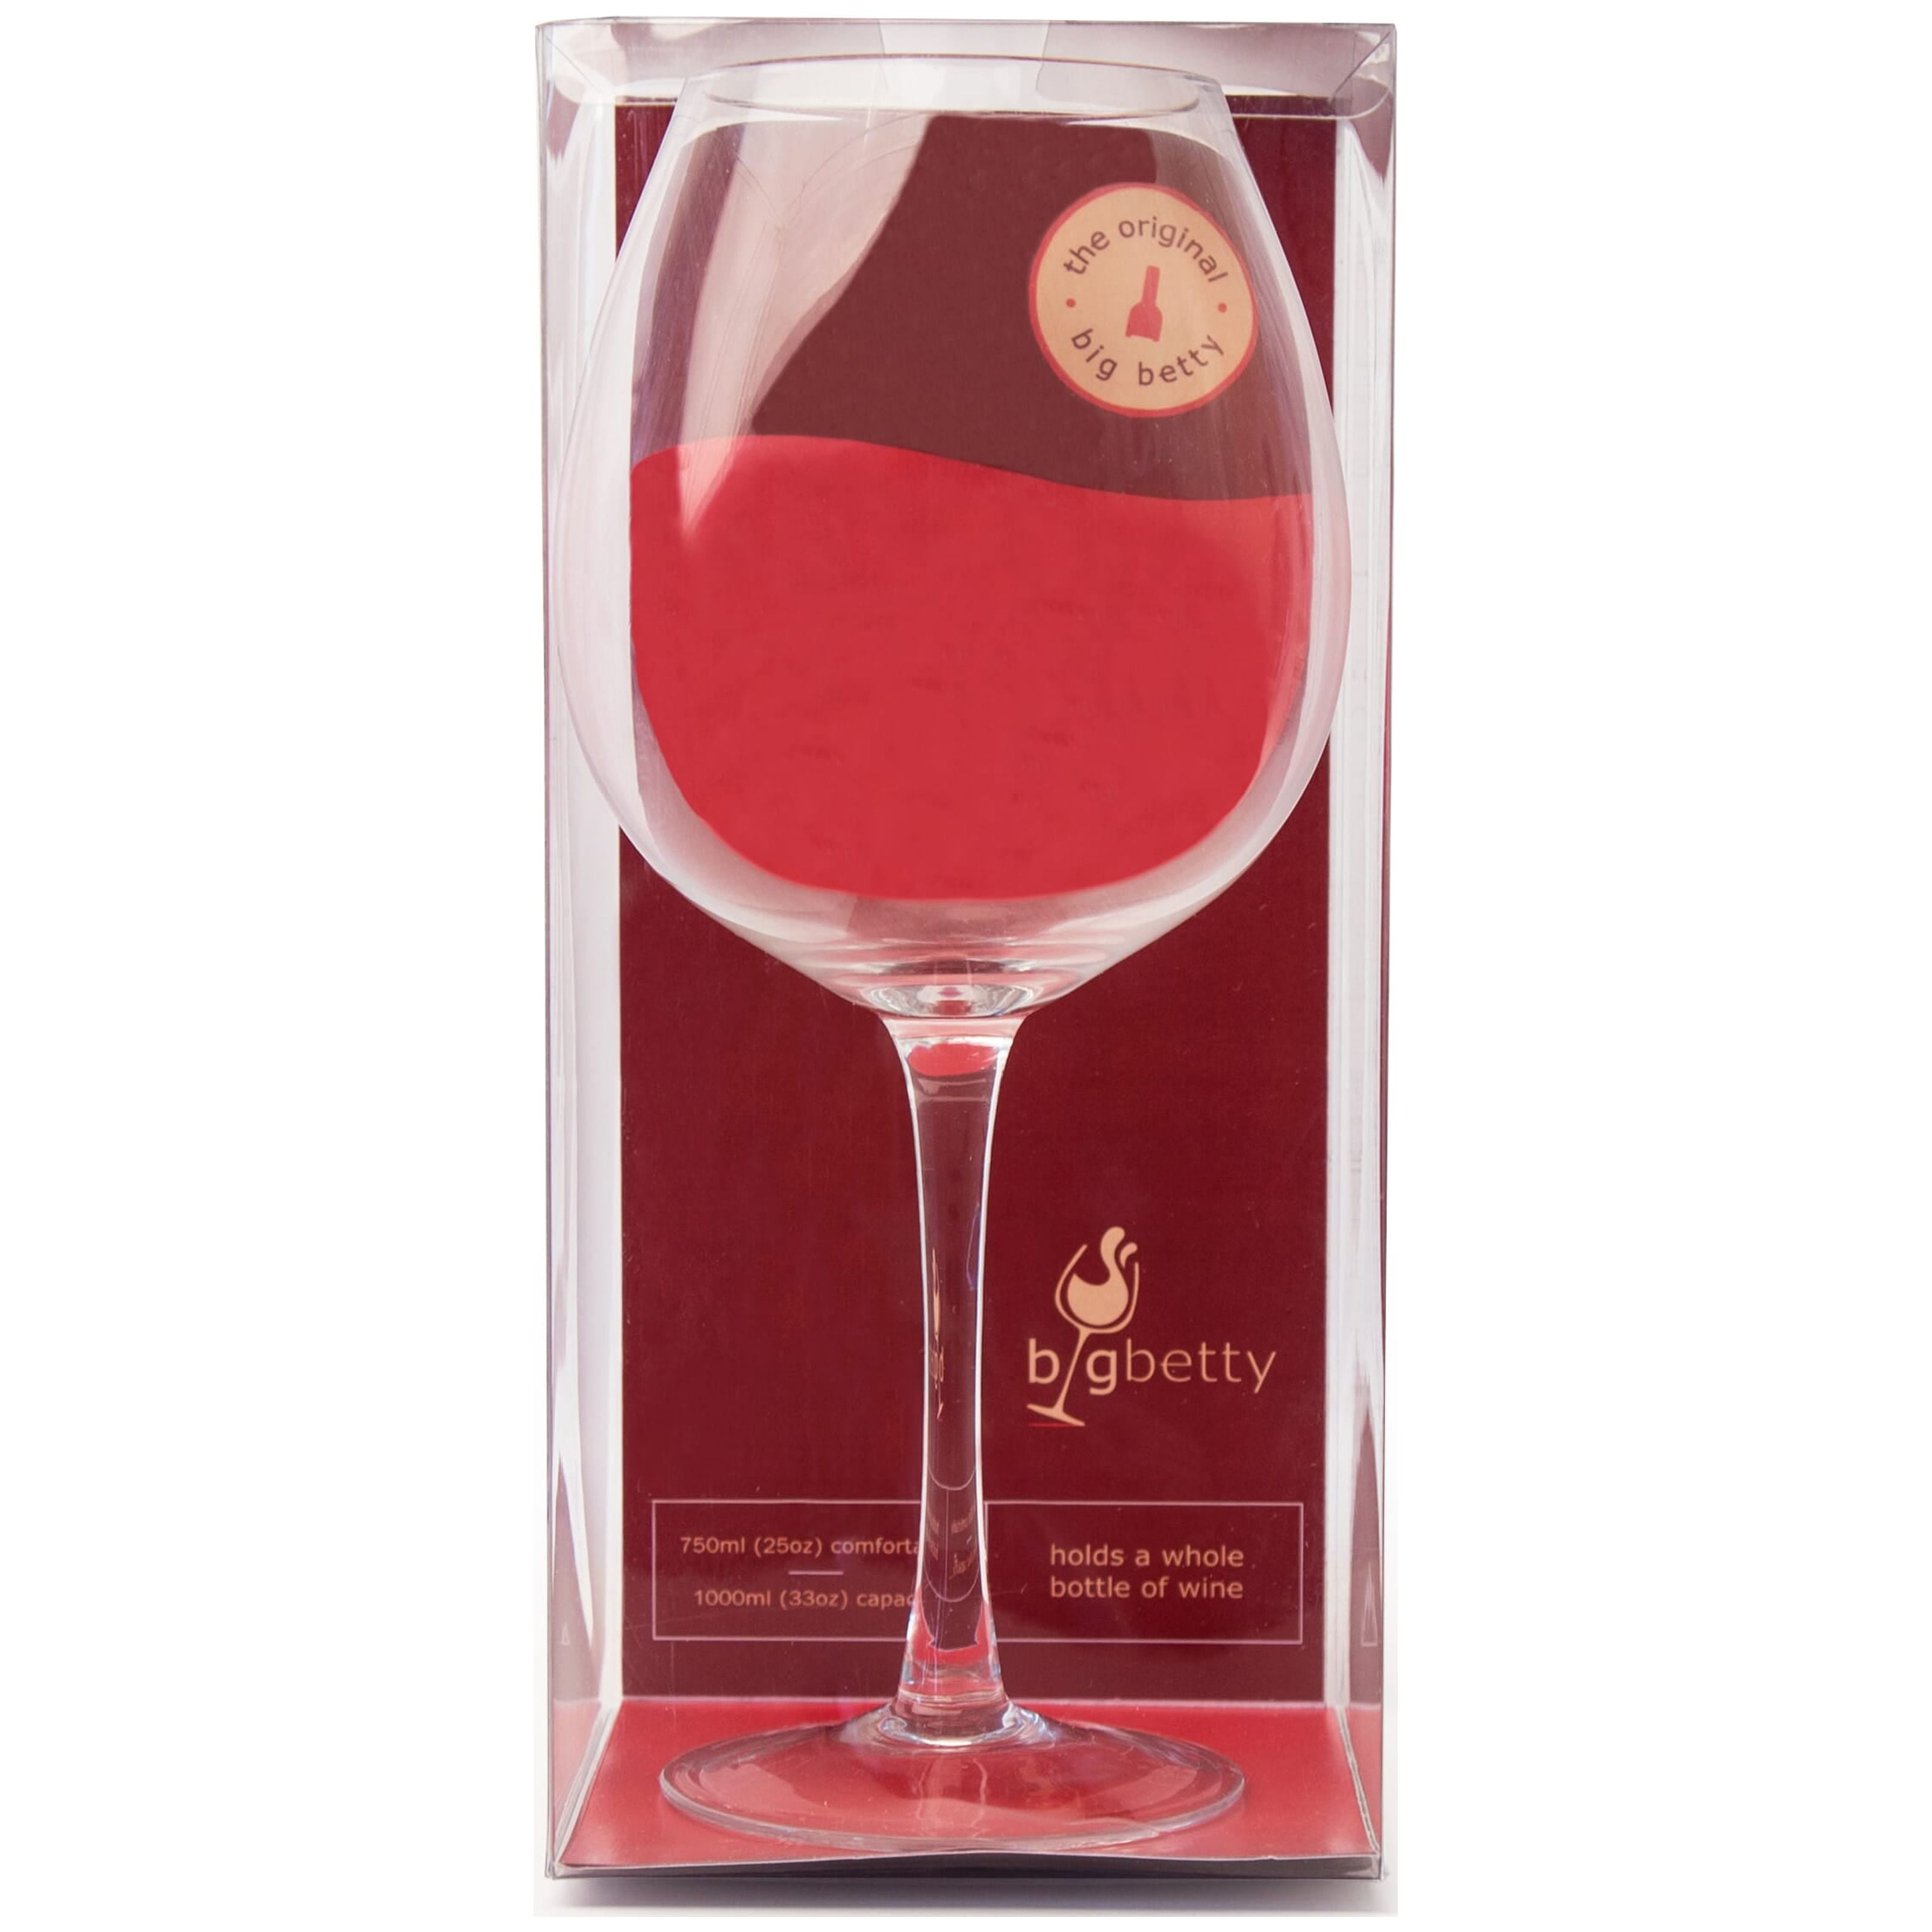 Big Betty - Premium Giant Champagne Glass, Holds a